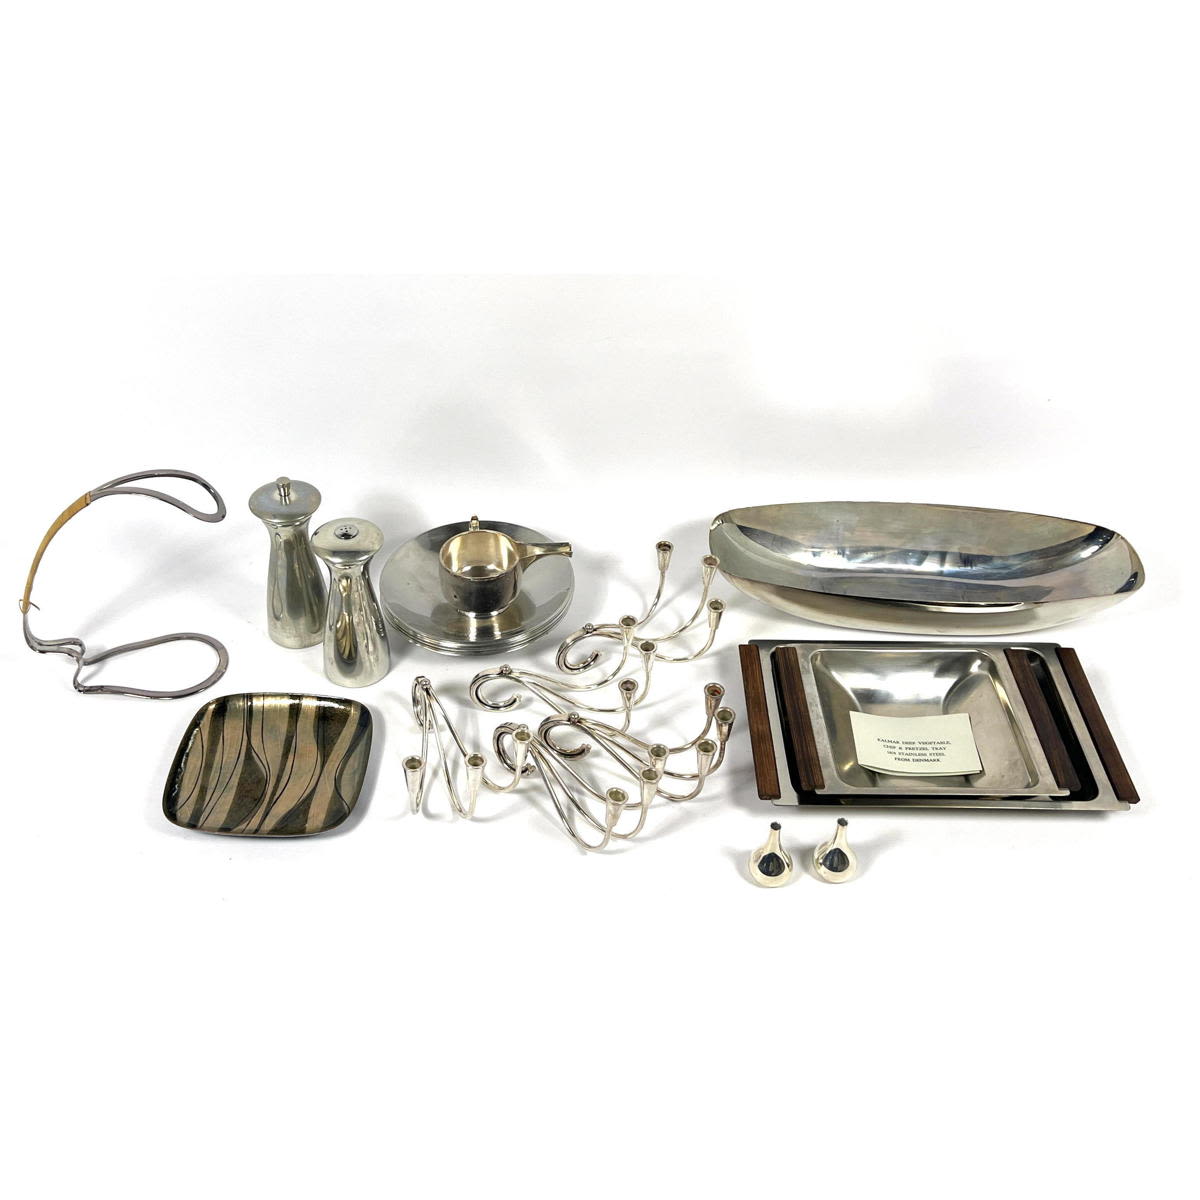 Lot of Midcentury Silver and Metalware.